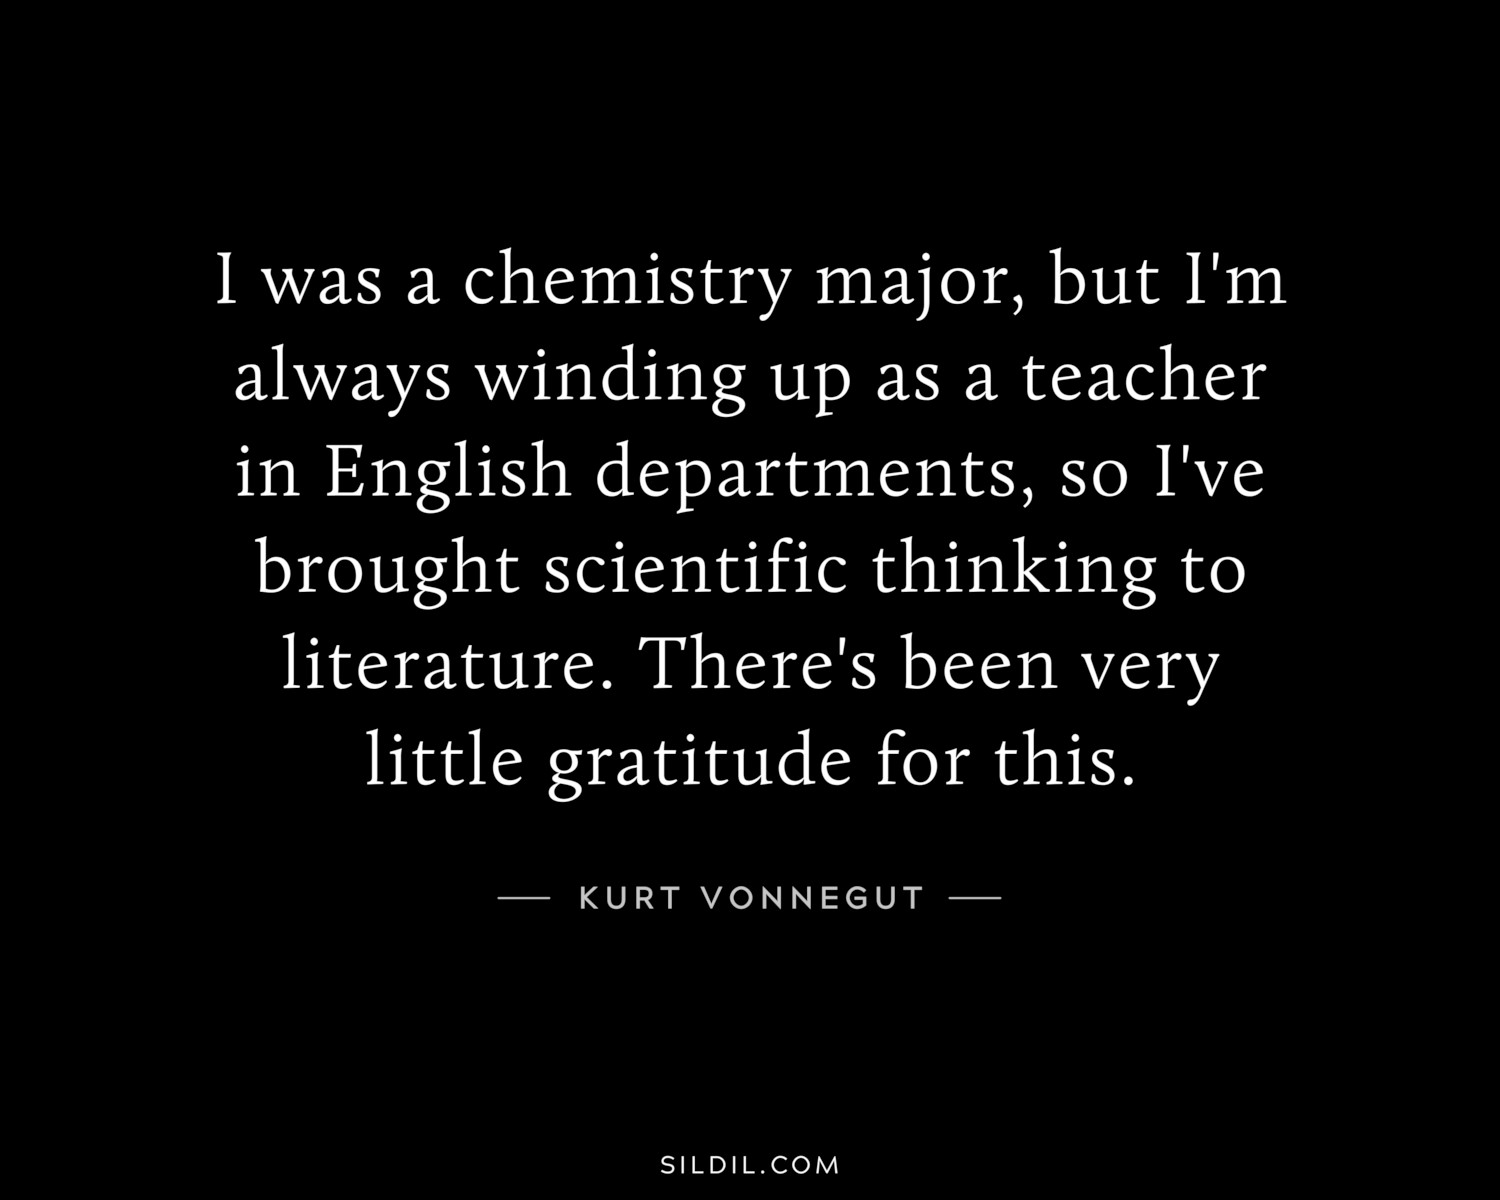 I was a chemistry major, but I'm always winding up as a teacher in English departments, so I've brought scientific thinking to literature. There's been very little gratitude for this.